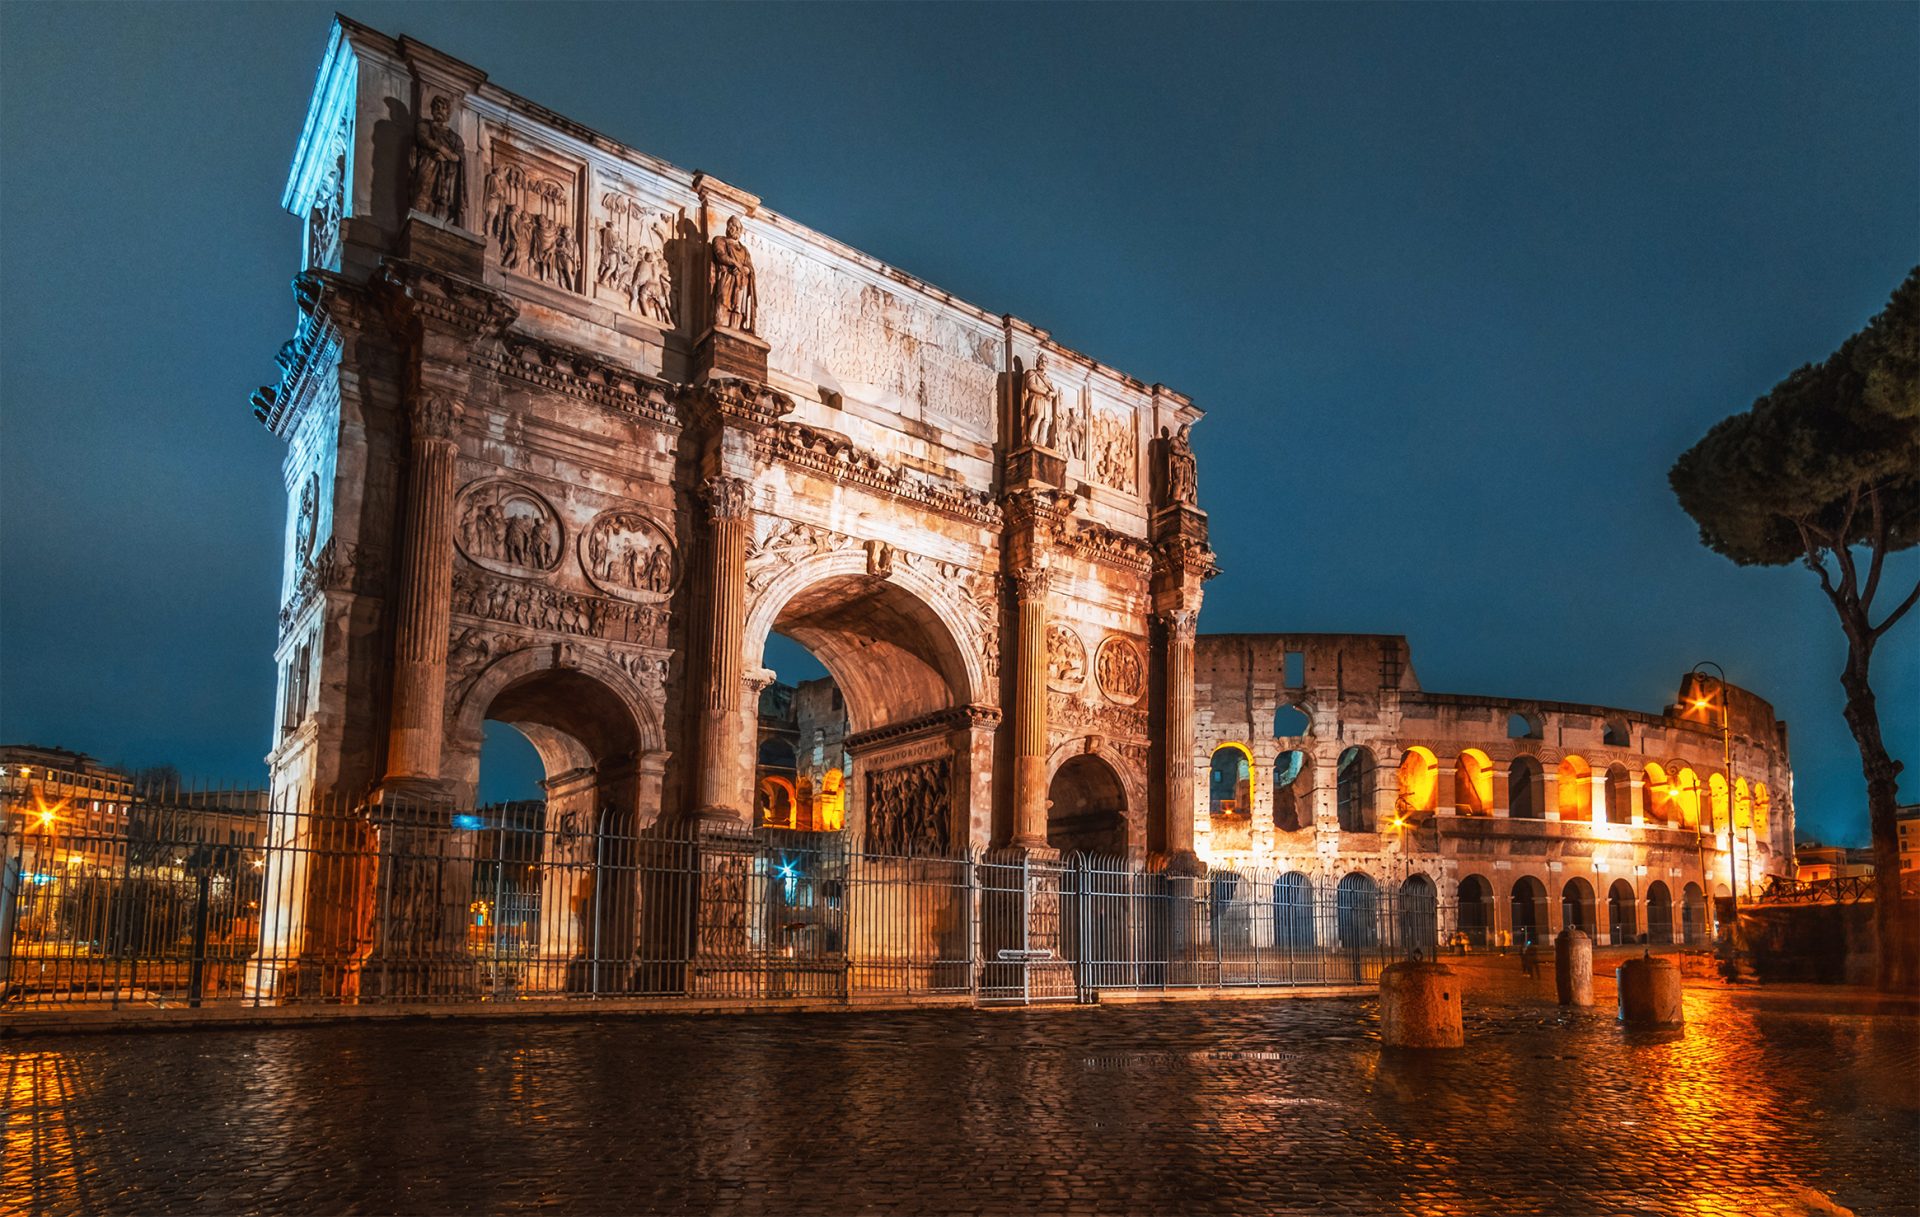 A photo of the Arch of Constantine and the Colosseum in Rome, Italy at night, with warm lights, a cloudy sky, and a cobblestone street.